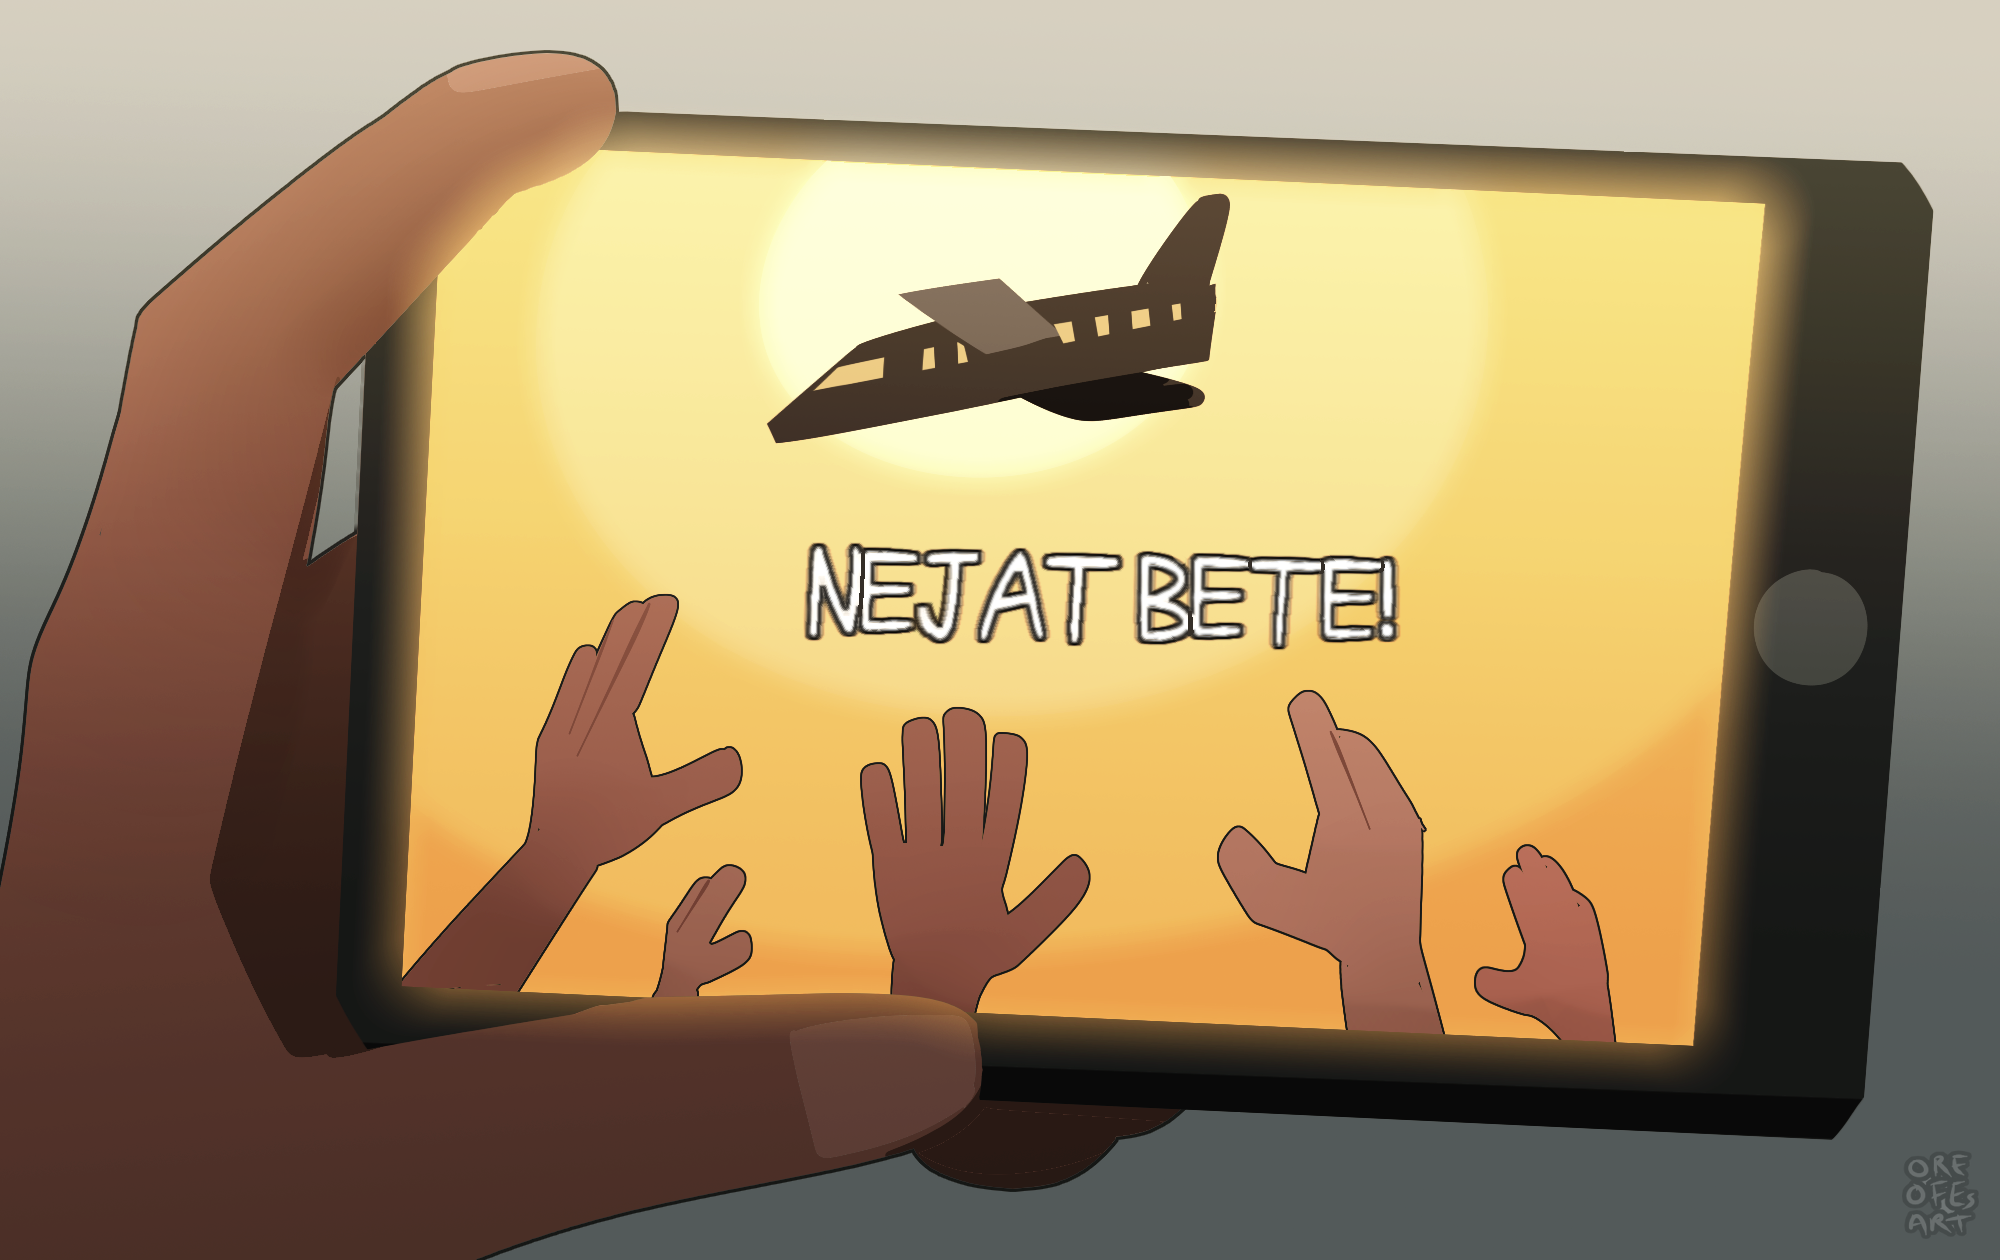 An illustration of a phone screen showing a falling airplane with hands raised up toward it with the text "Nejat bete" which translates to "Save me"